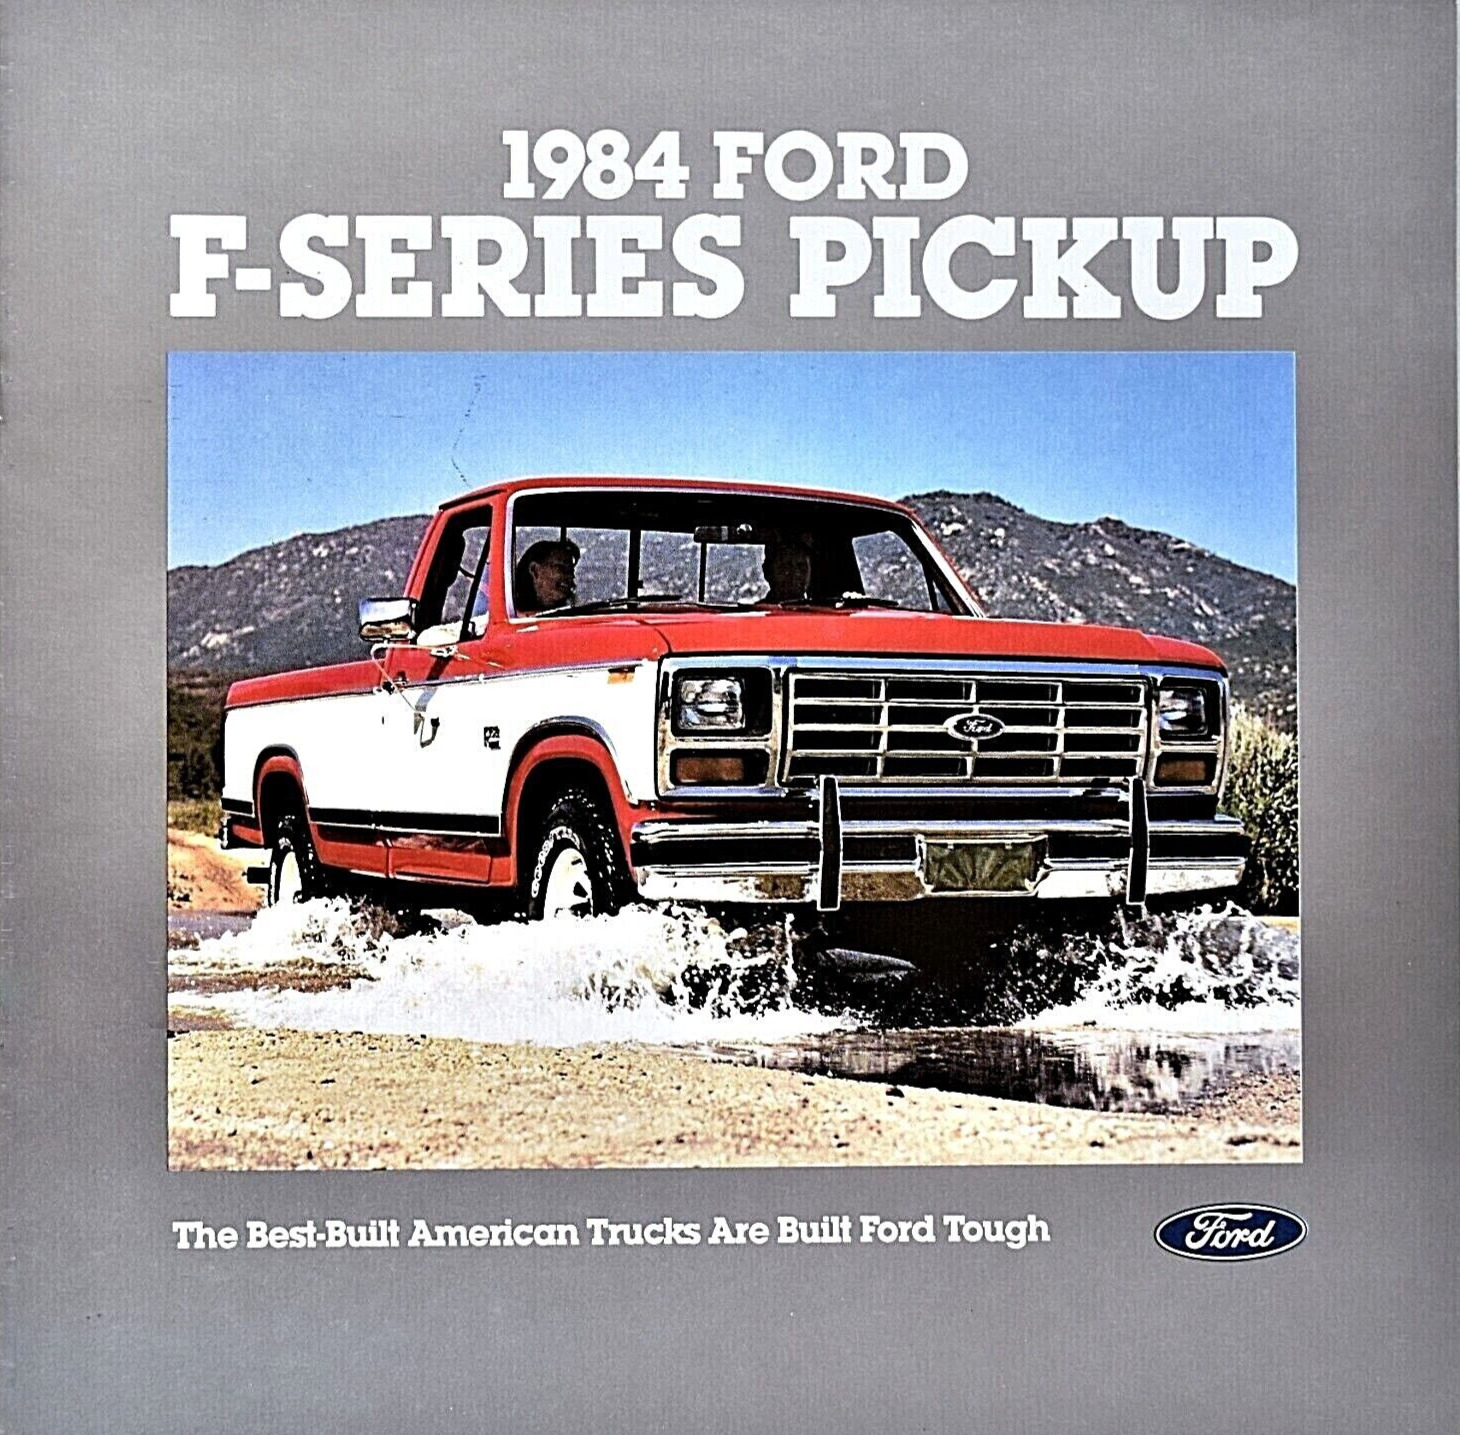 1984 FORD F-SERIES PICKUP  SALES BROCHURE CATALOG ~ 20 PAGES ~ 11